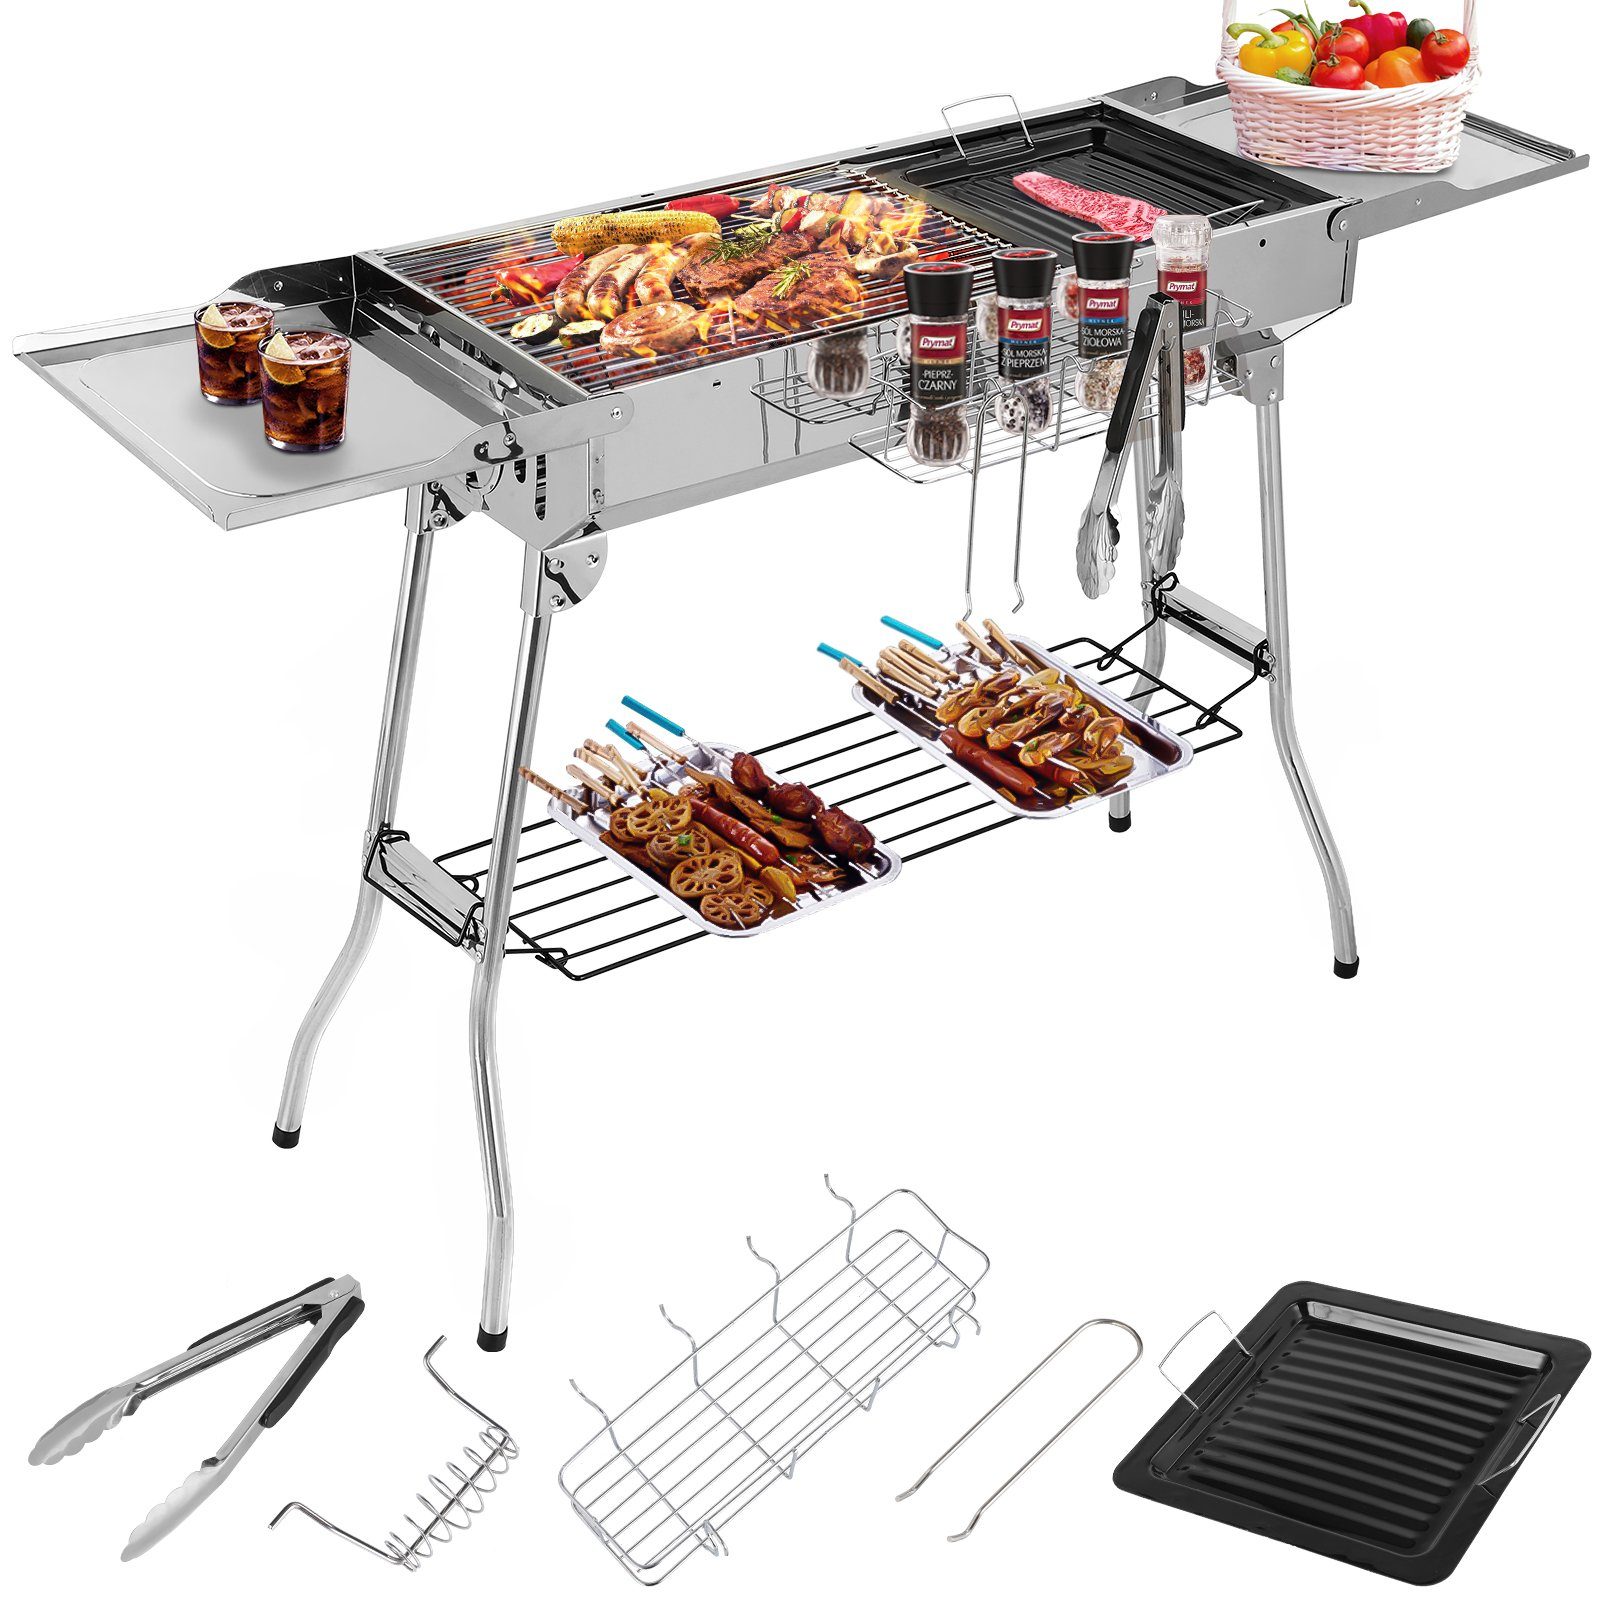 BBQ Edelstahl Grill Holzkohlegrill Standgrill Tragbar Camping Klappgrill Outdoor 